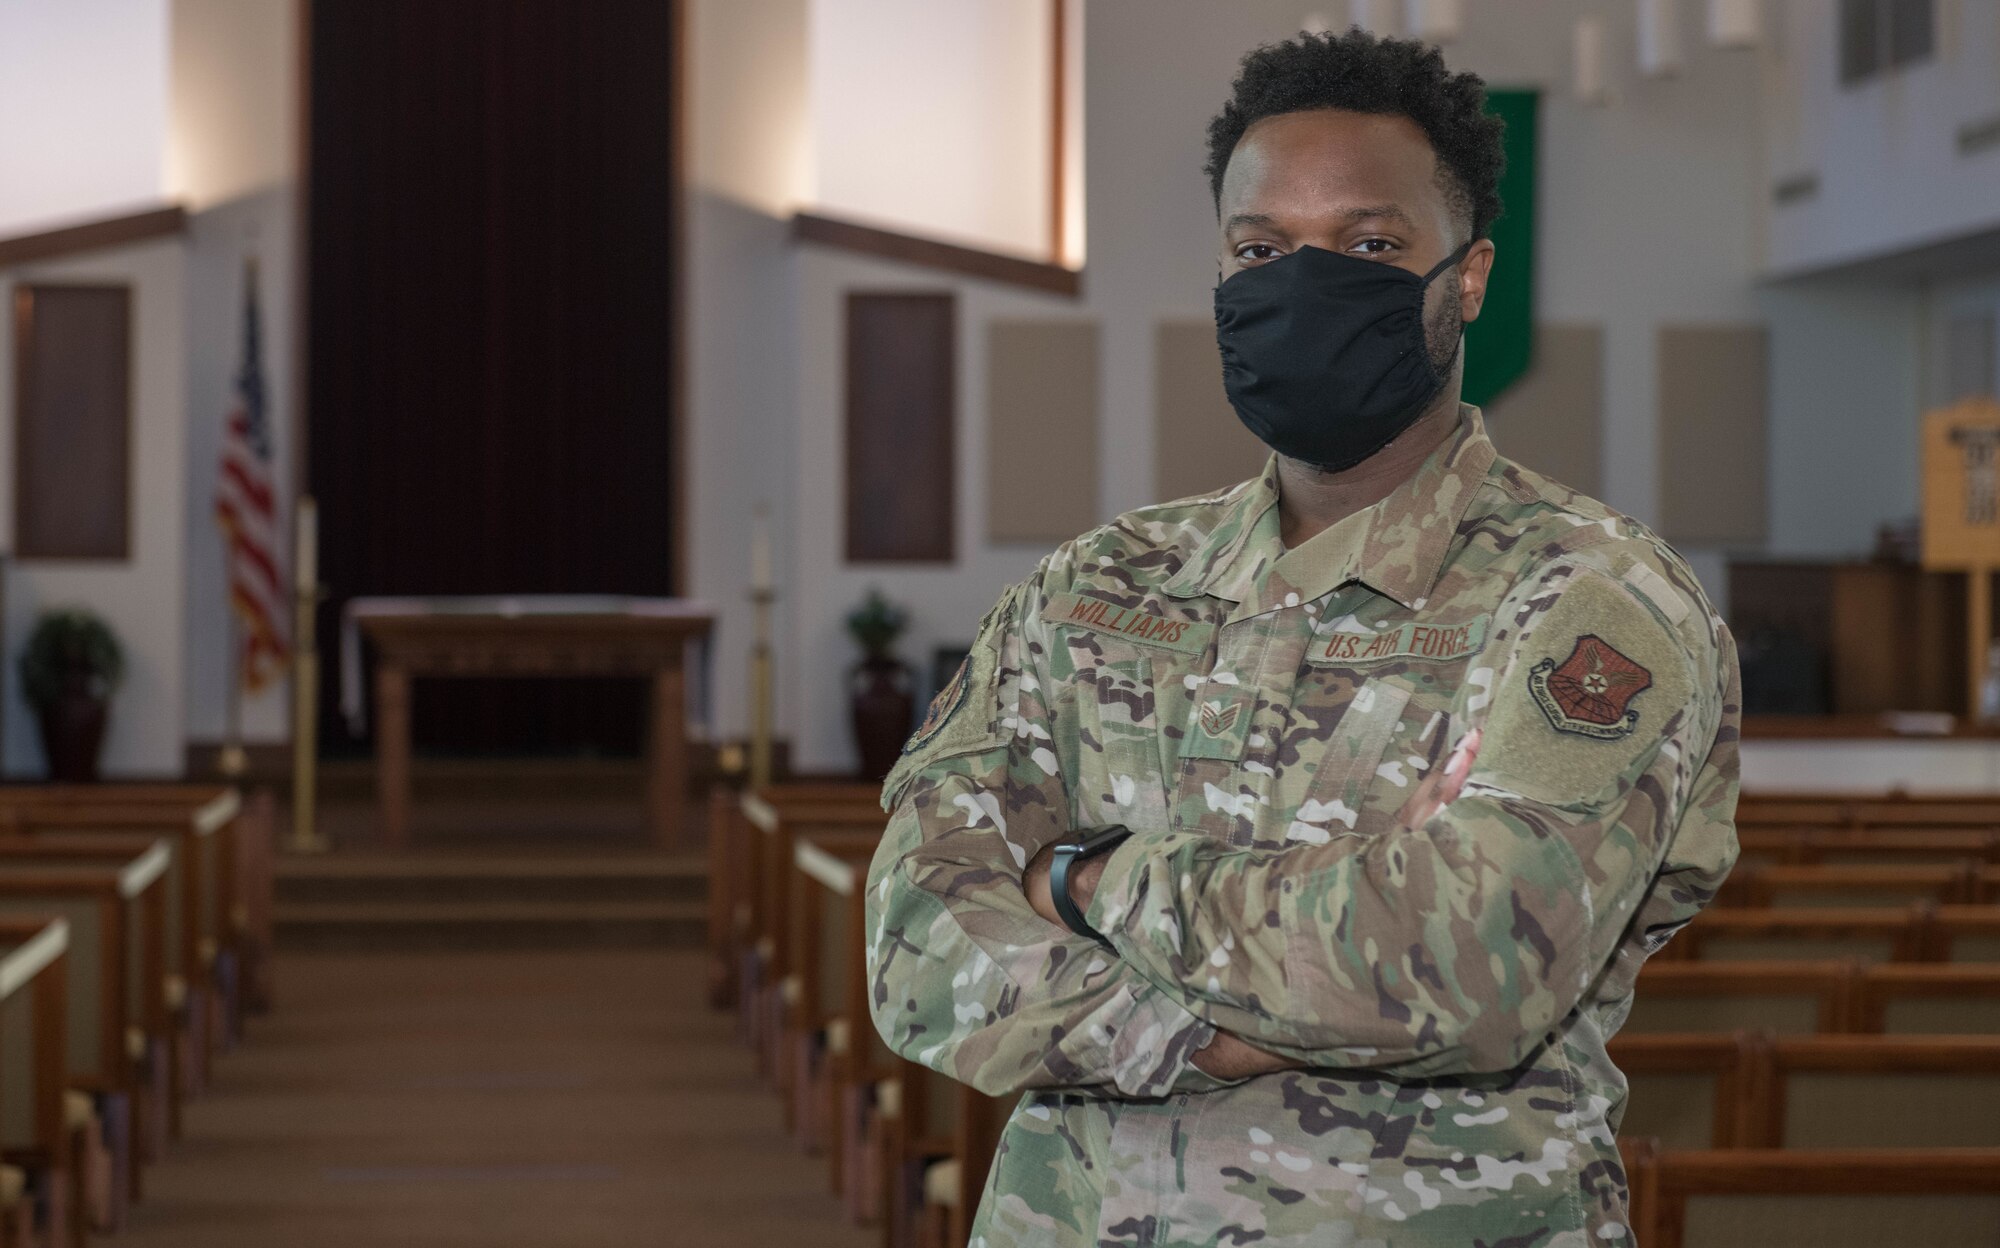 U.S. Air Force Tech. Sgt. Terrence Williams, a 509th Bomb Wing religious affairs Airman, poses in the Spirit Chapel sanctuary at Whiteman Air Force base, Missouri, July 7, 2020. Religious Affairs Airmen work with Chaplains to provide confidential counseling and support for religious needs and services. (U.S. Air Force Photo by Senior Airman Thomas Johns.)